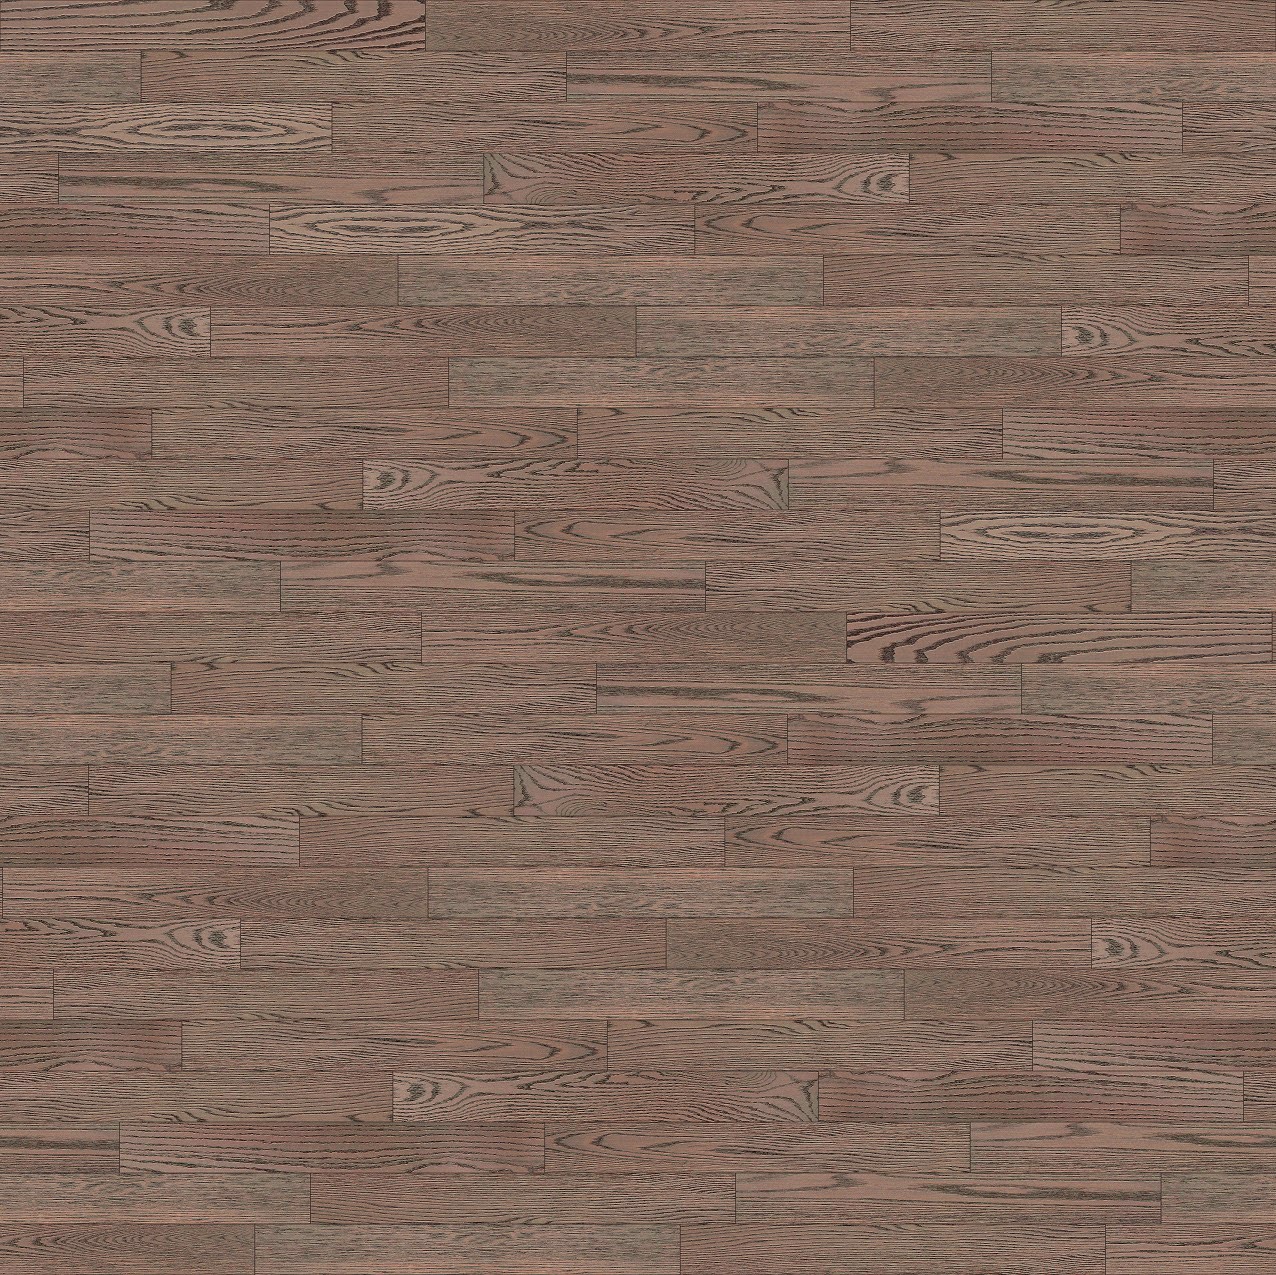  TEXTURE  SEAMLESS PARQUET  Vray Sketchup  TUT